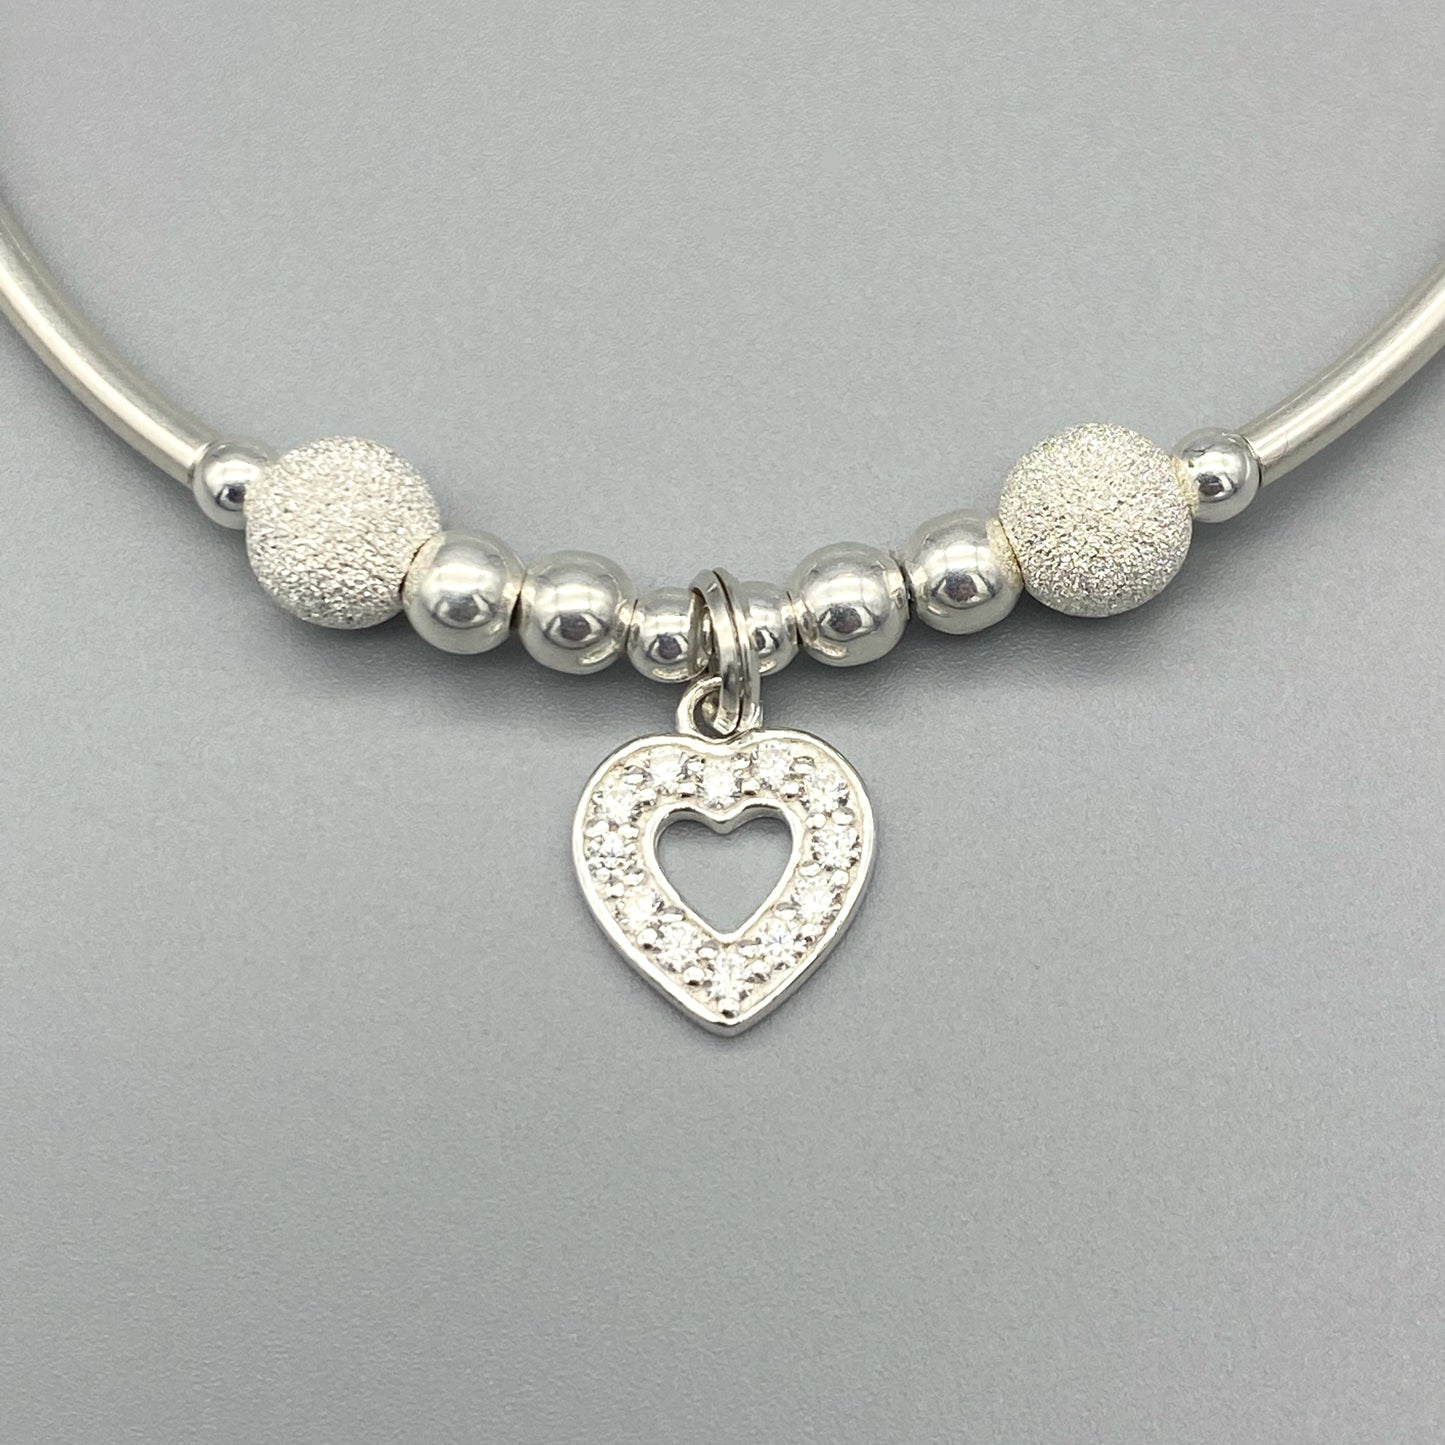 Closeup of Diamond heart charm sterling silver hand-made women's stacking bracelet by My Silver Wish